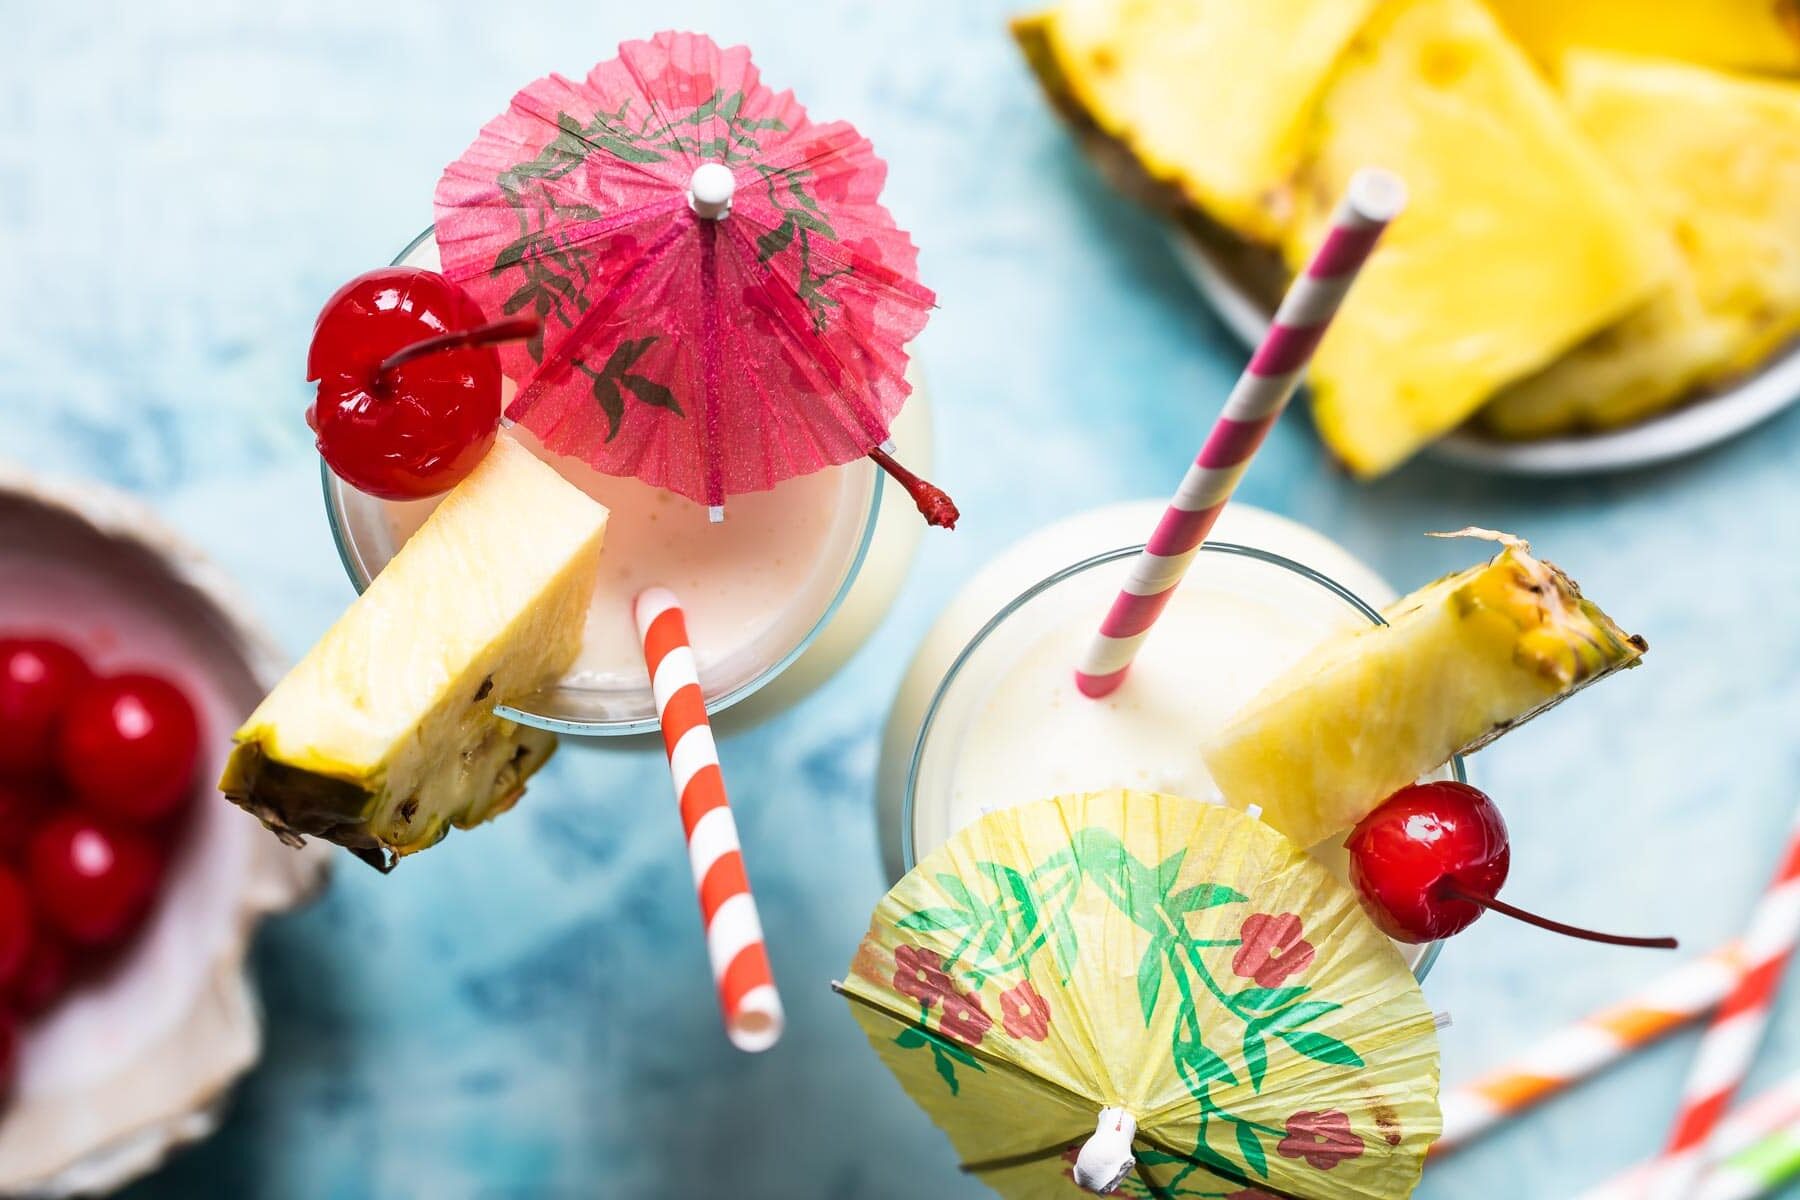 Two piña coladas garnished with pineapple and cherries.